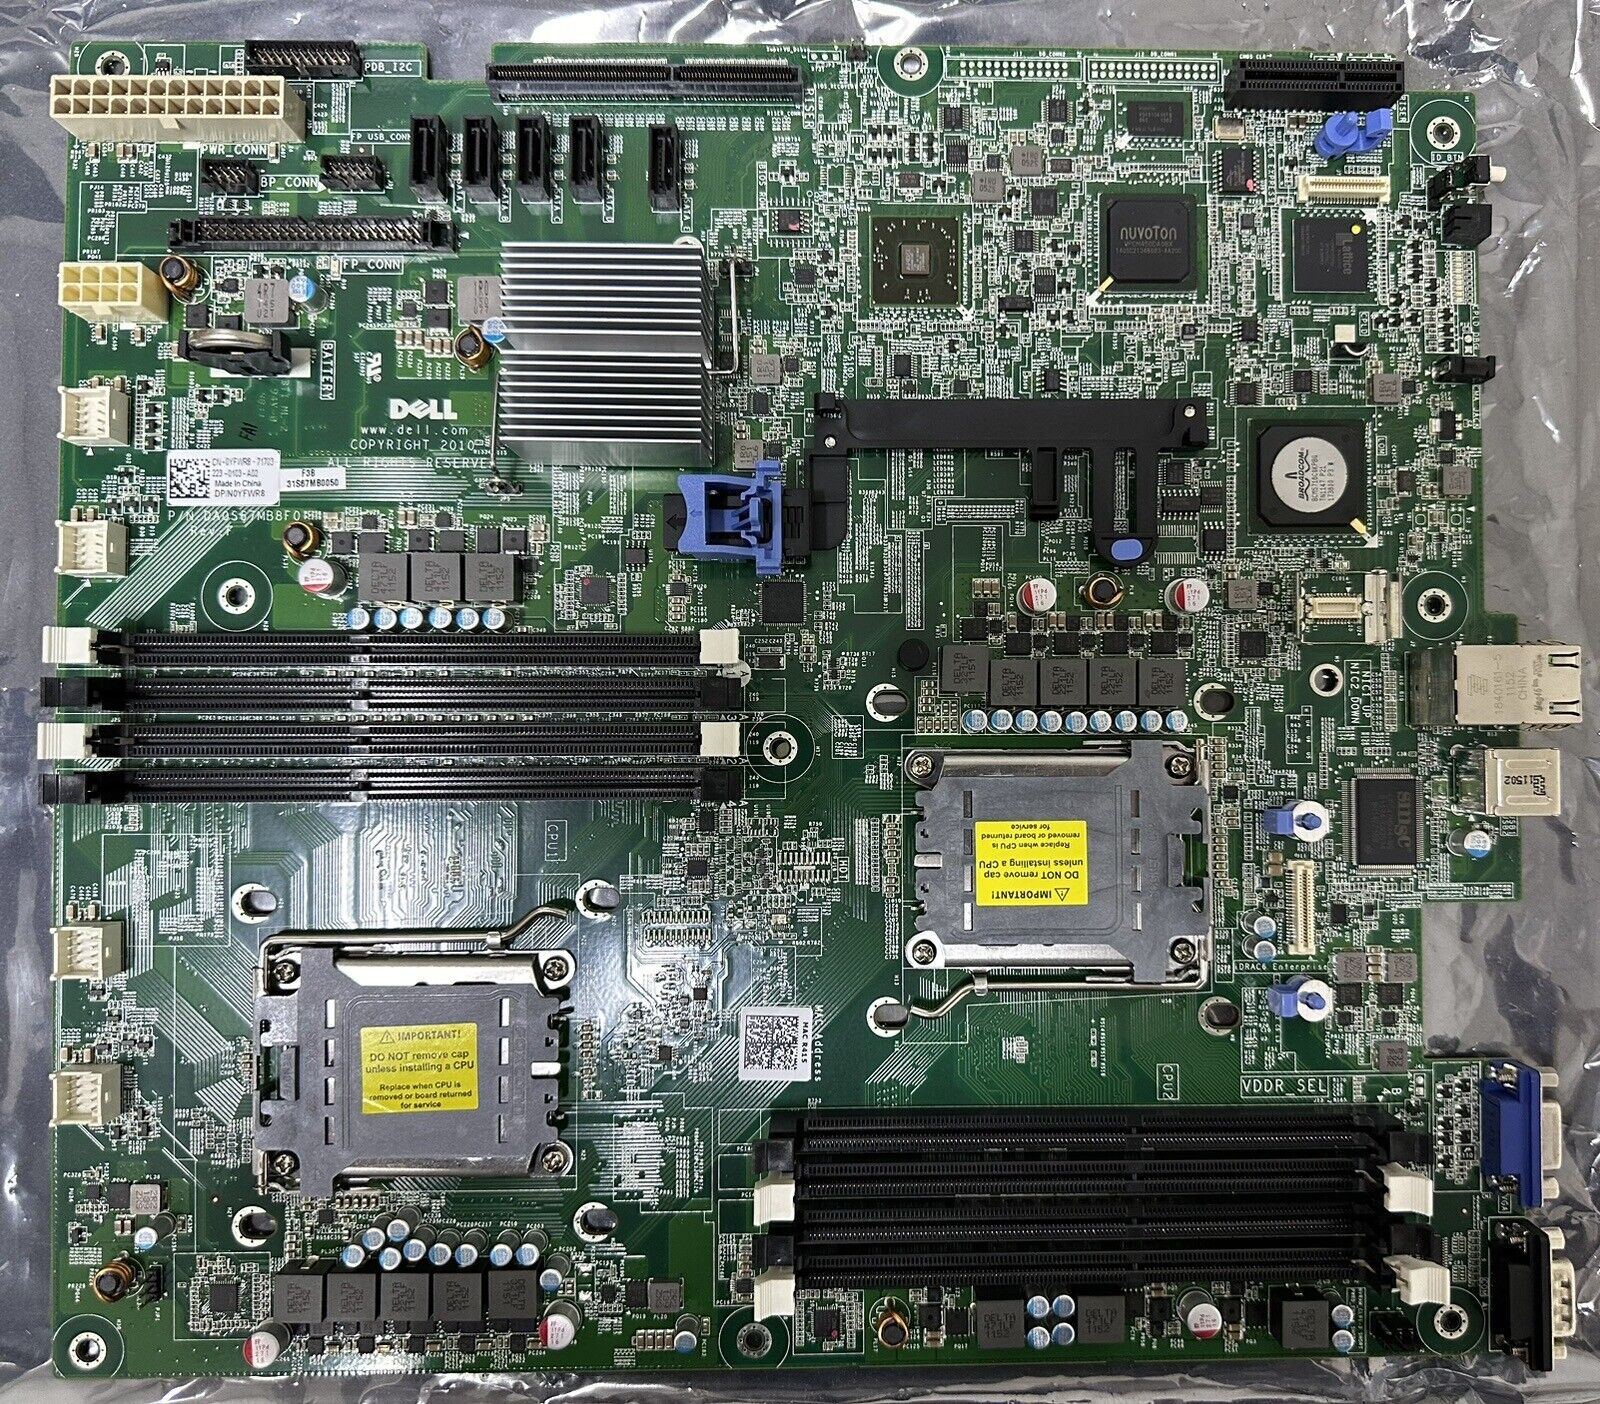 New Dell PowerEdge Server Mainboard for R415 DP/N:  YFWR8